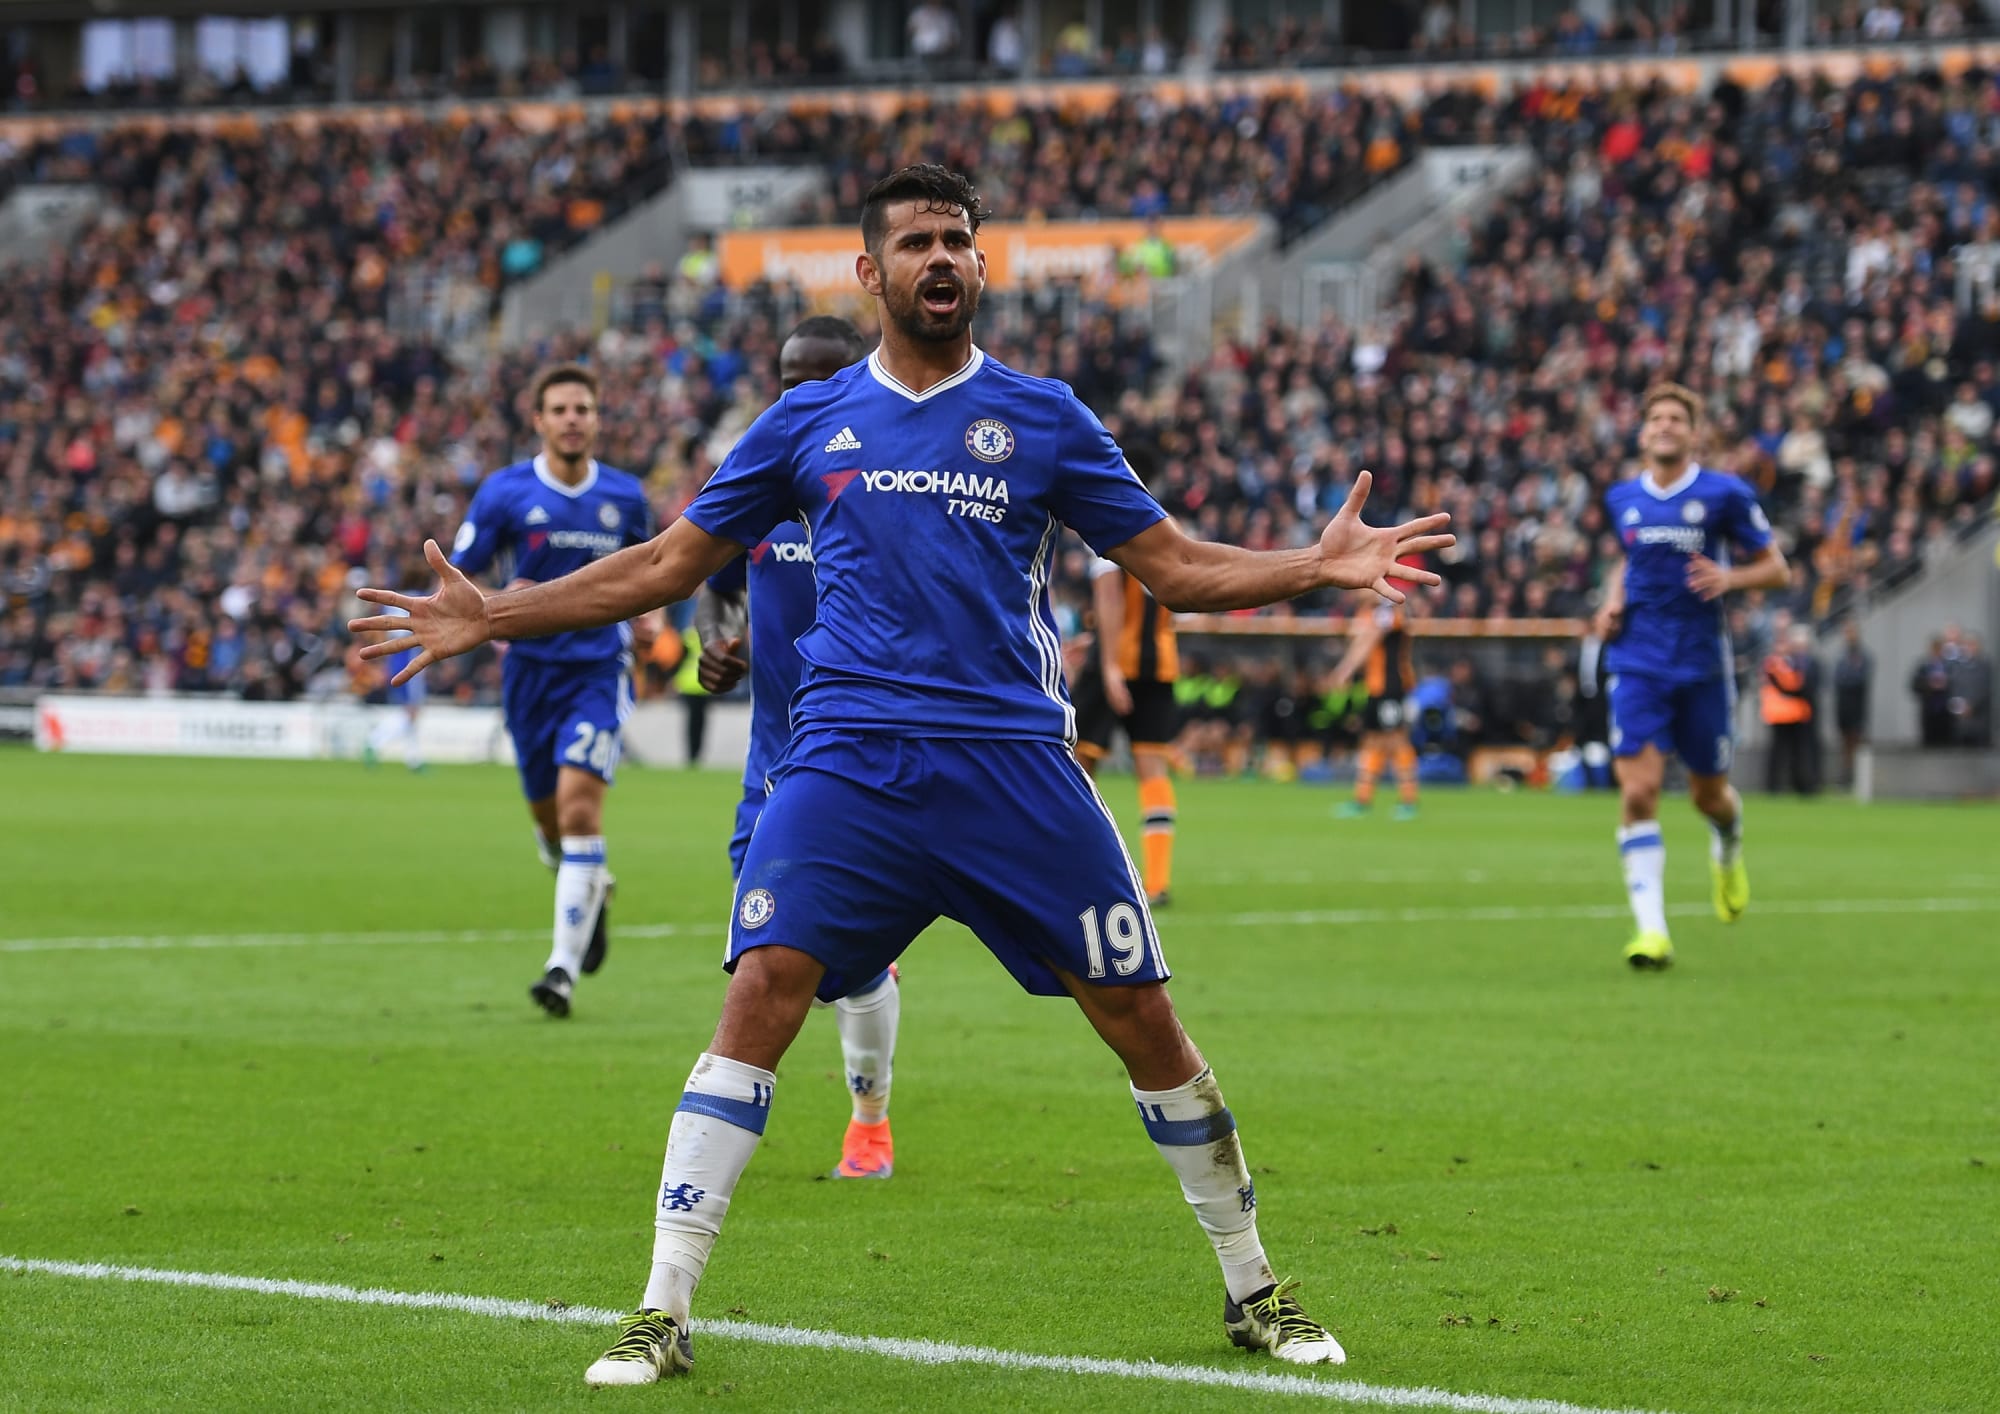 Hull City 0 - 2 Chelsea: Four lessons learned from a must-win